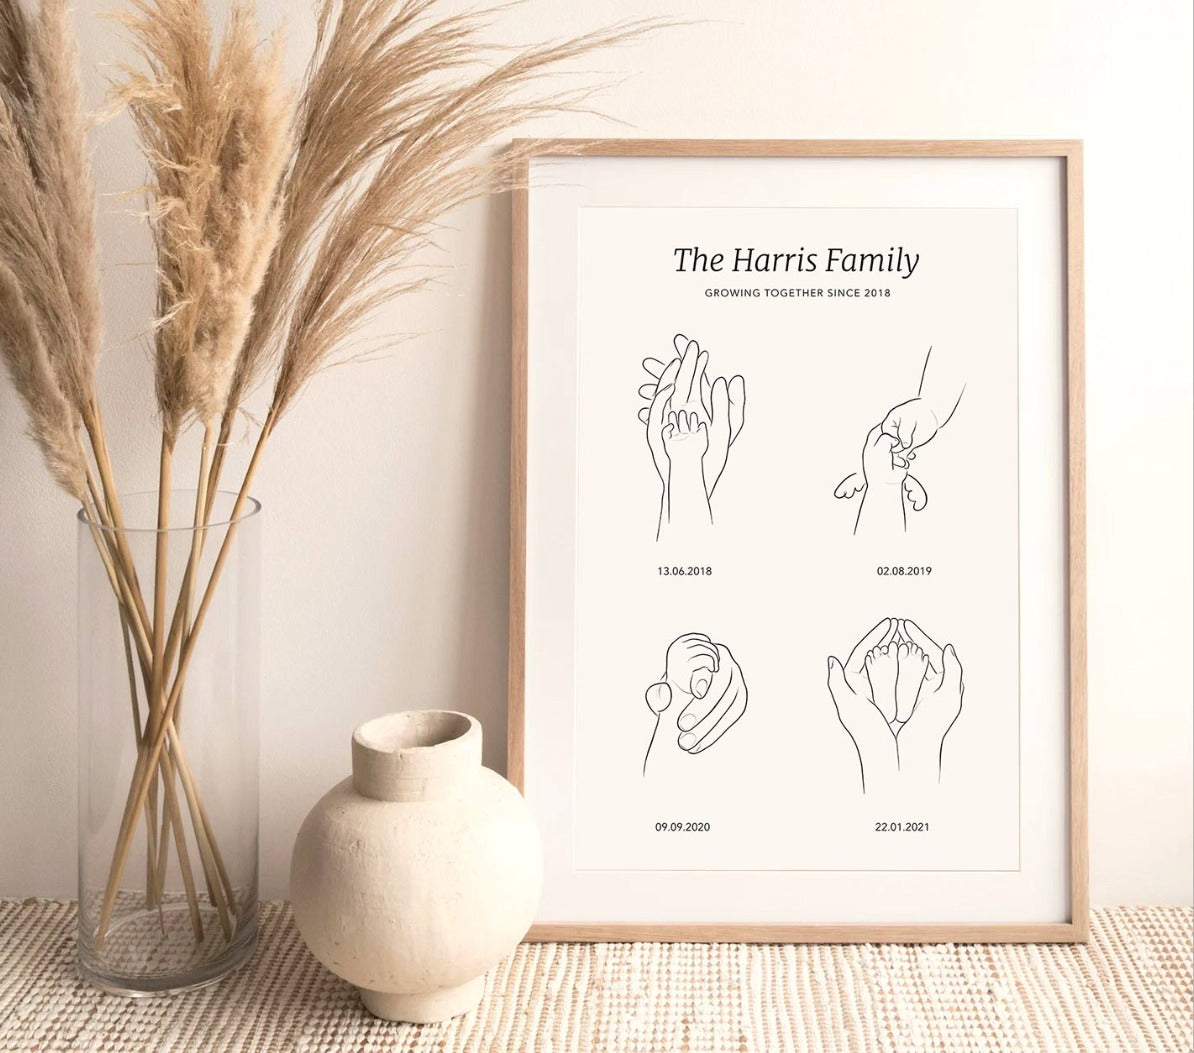 Our story personalised print. Family milestones print with hands line illustrations